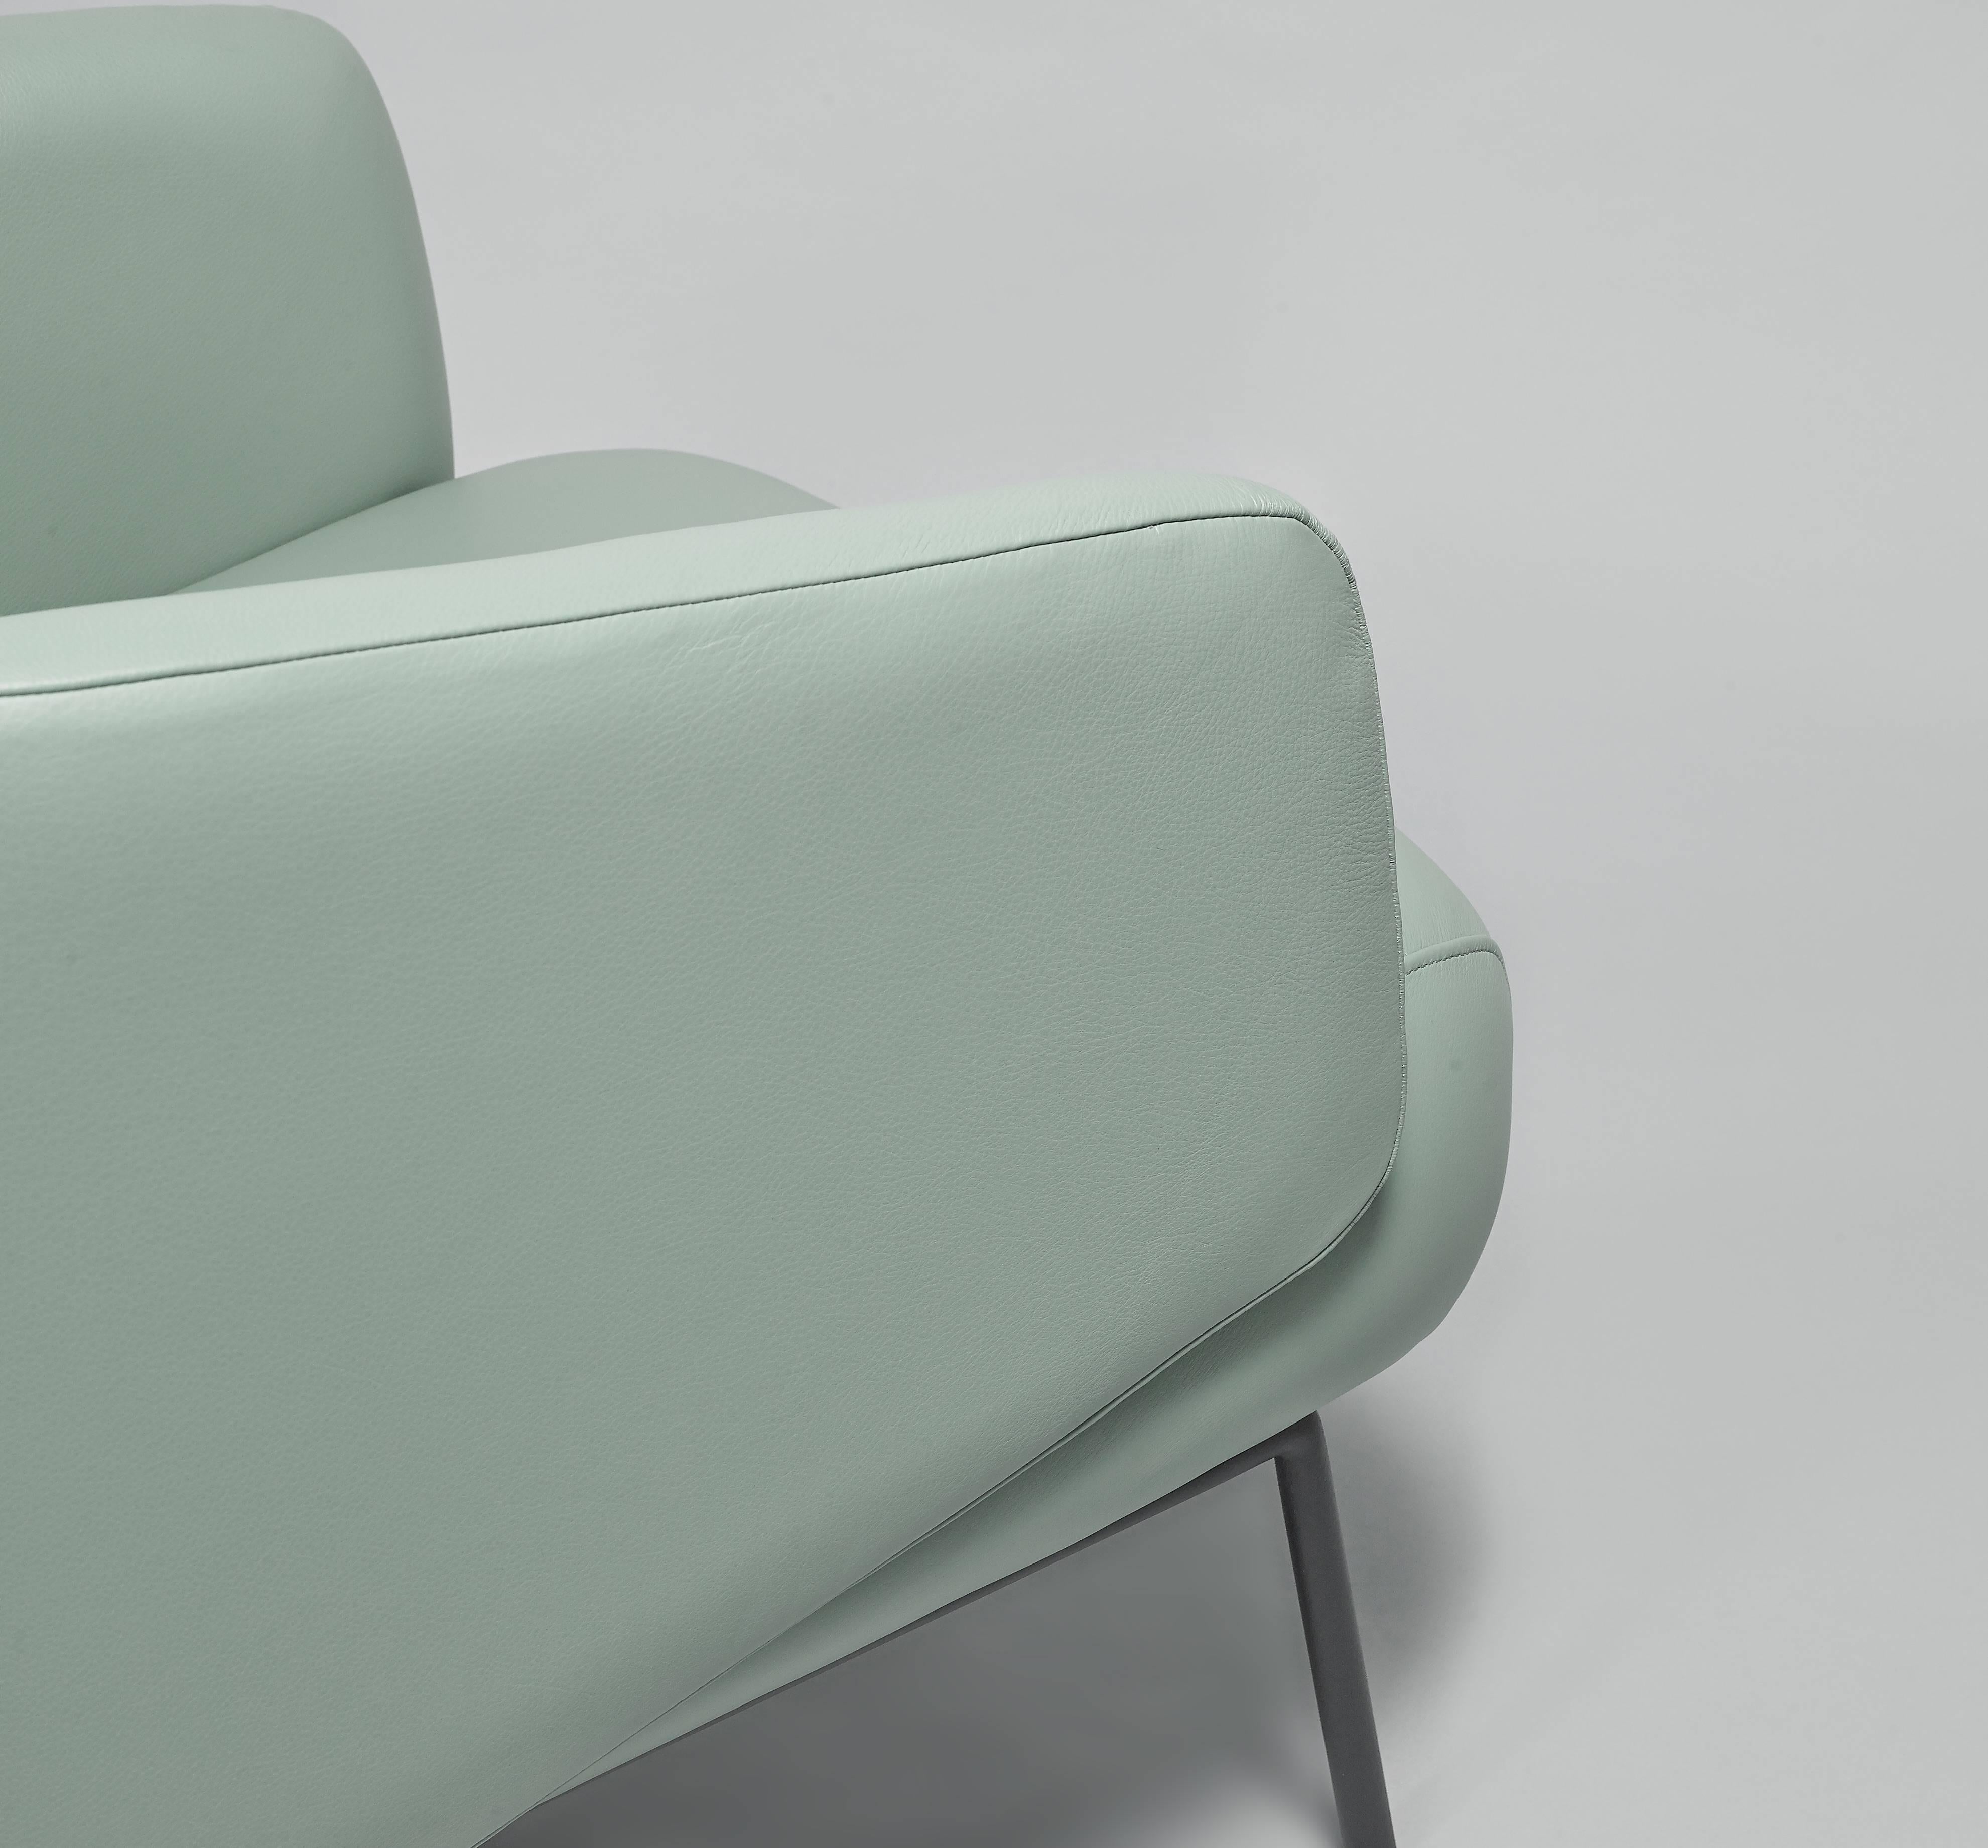 European modern pale teal green leather and black epoxy armchairs In Excellent Condition For Sale In Sydney, NSW